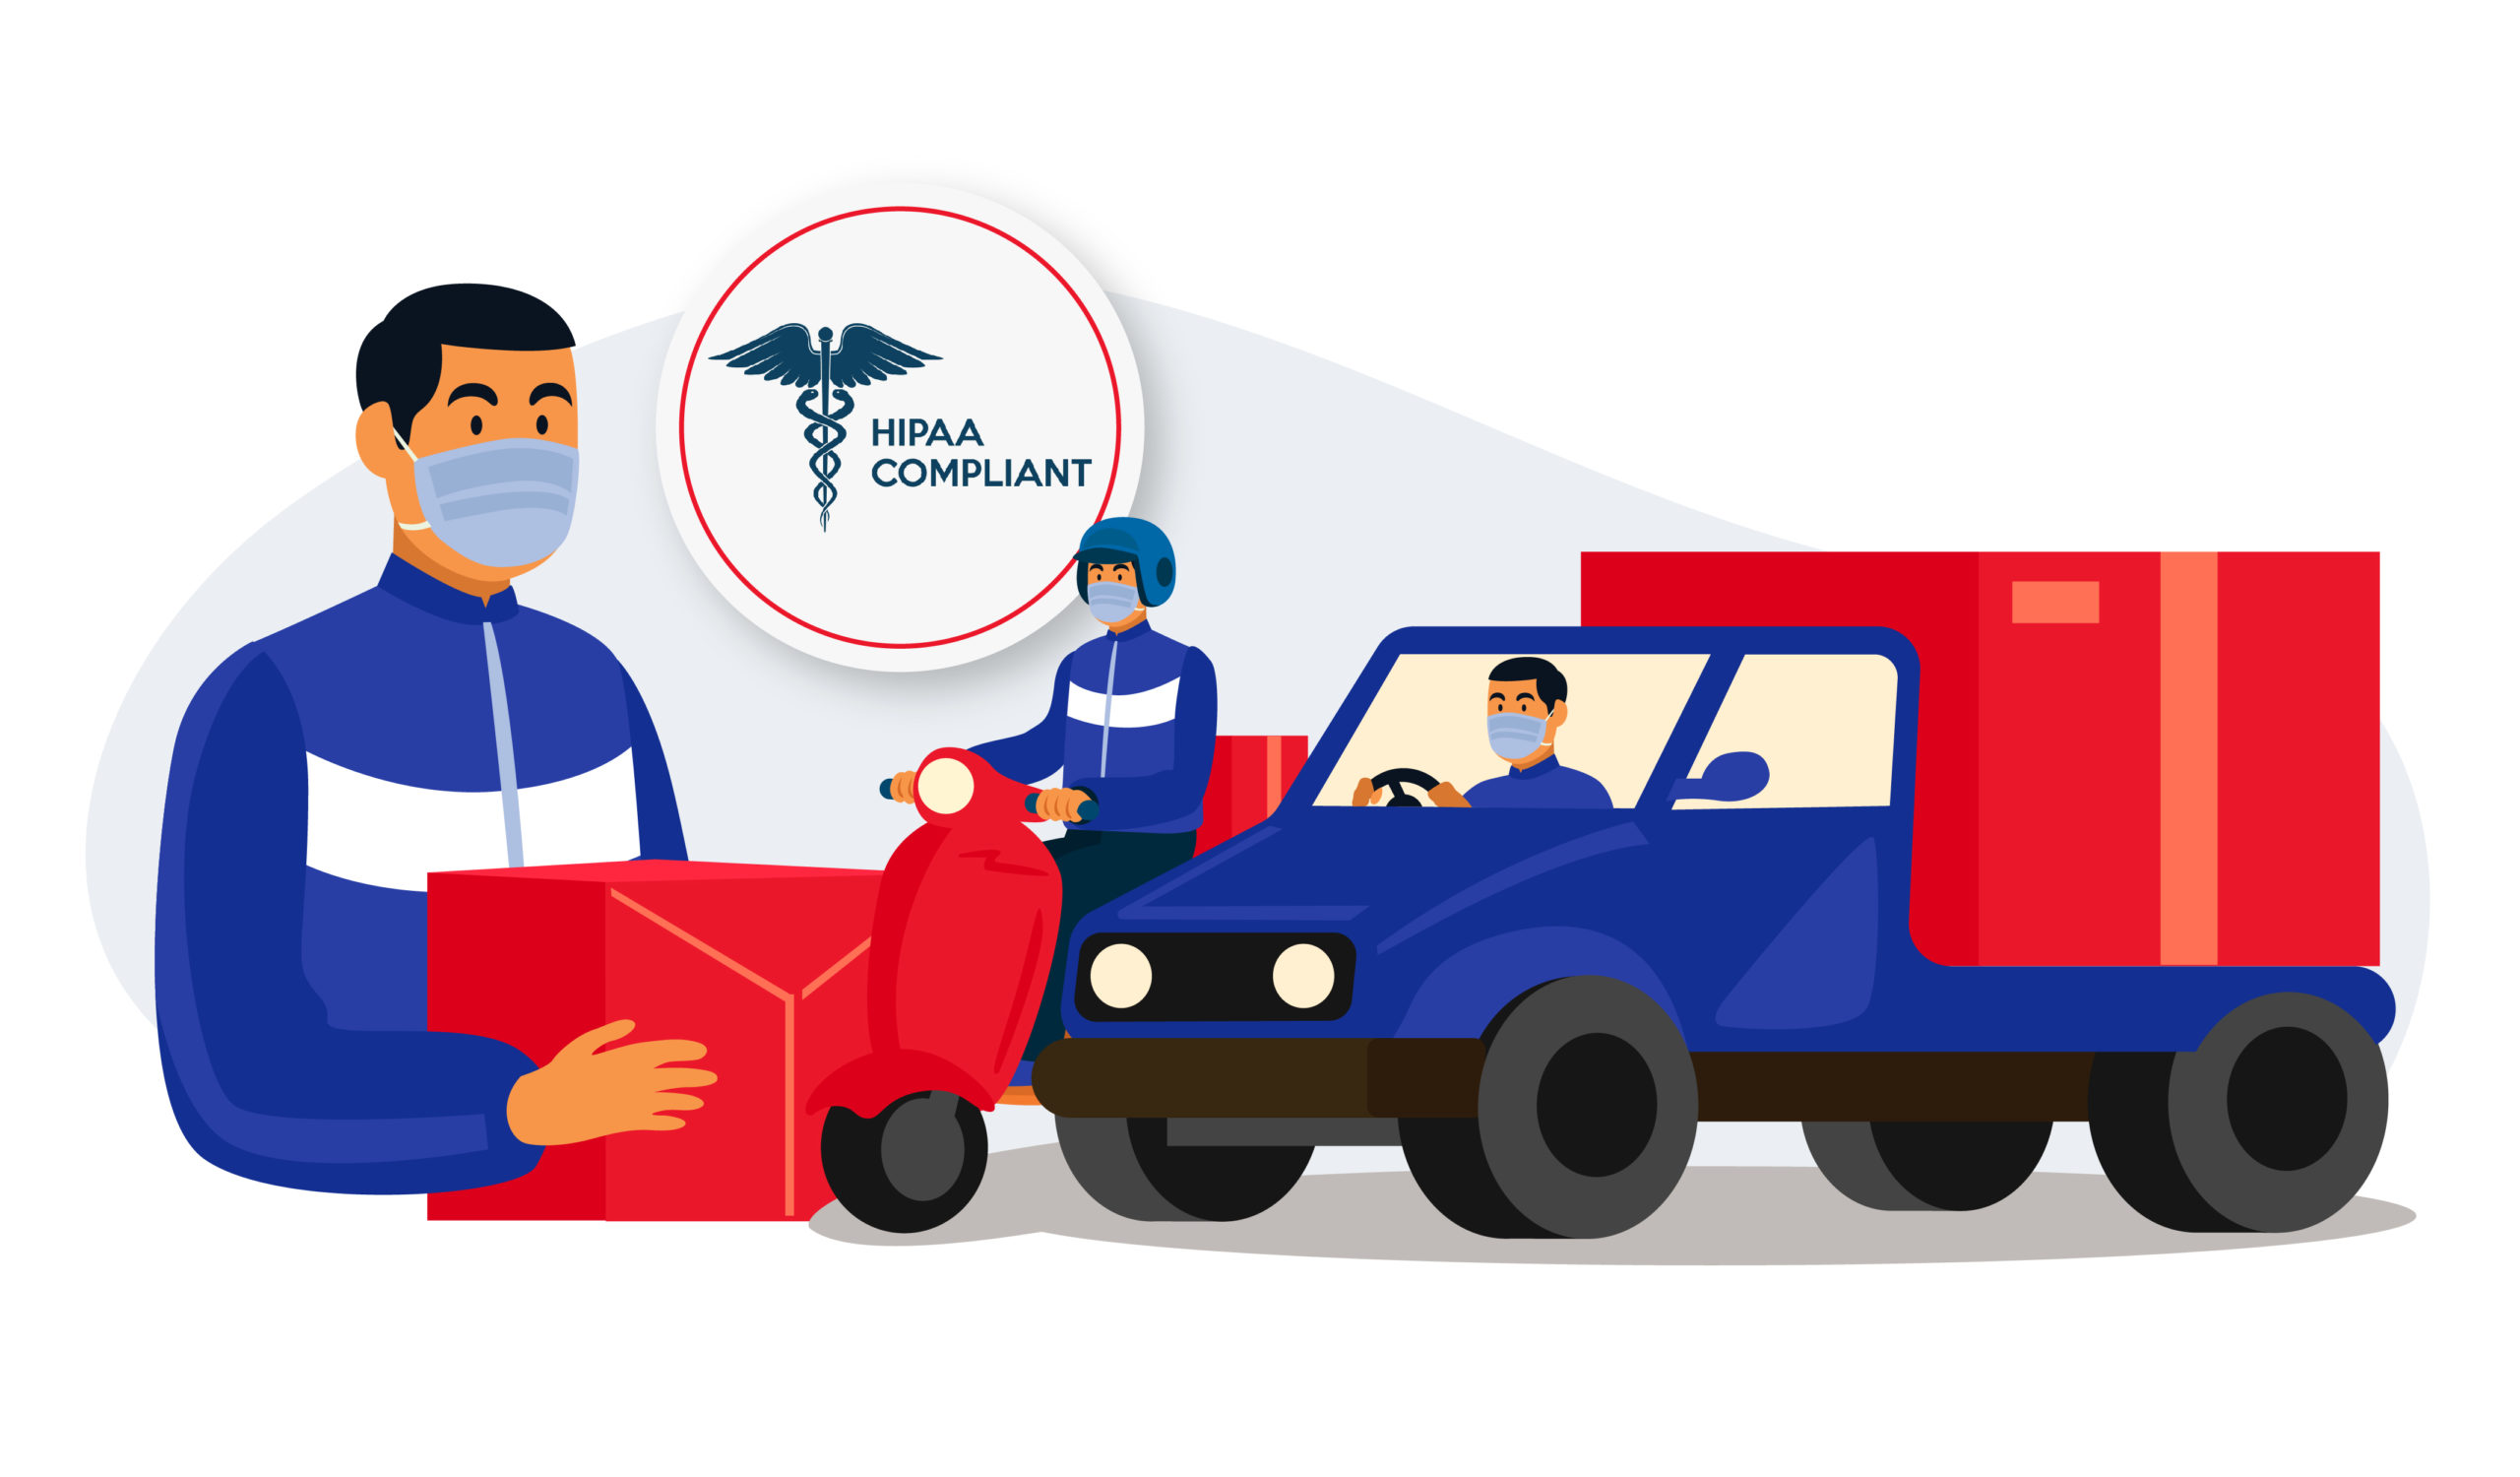 10 tips to choose the right medical courier - Dropoff same-day delivery